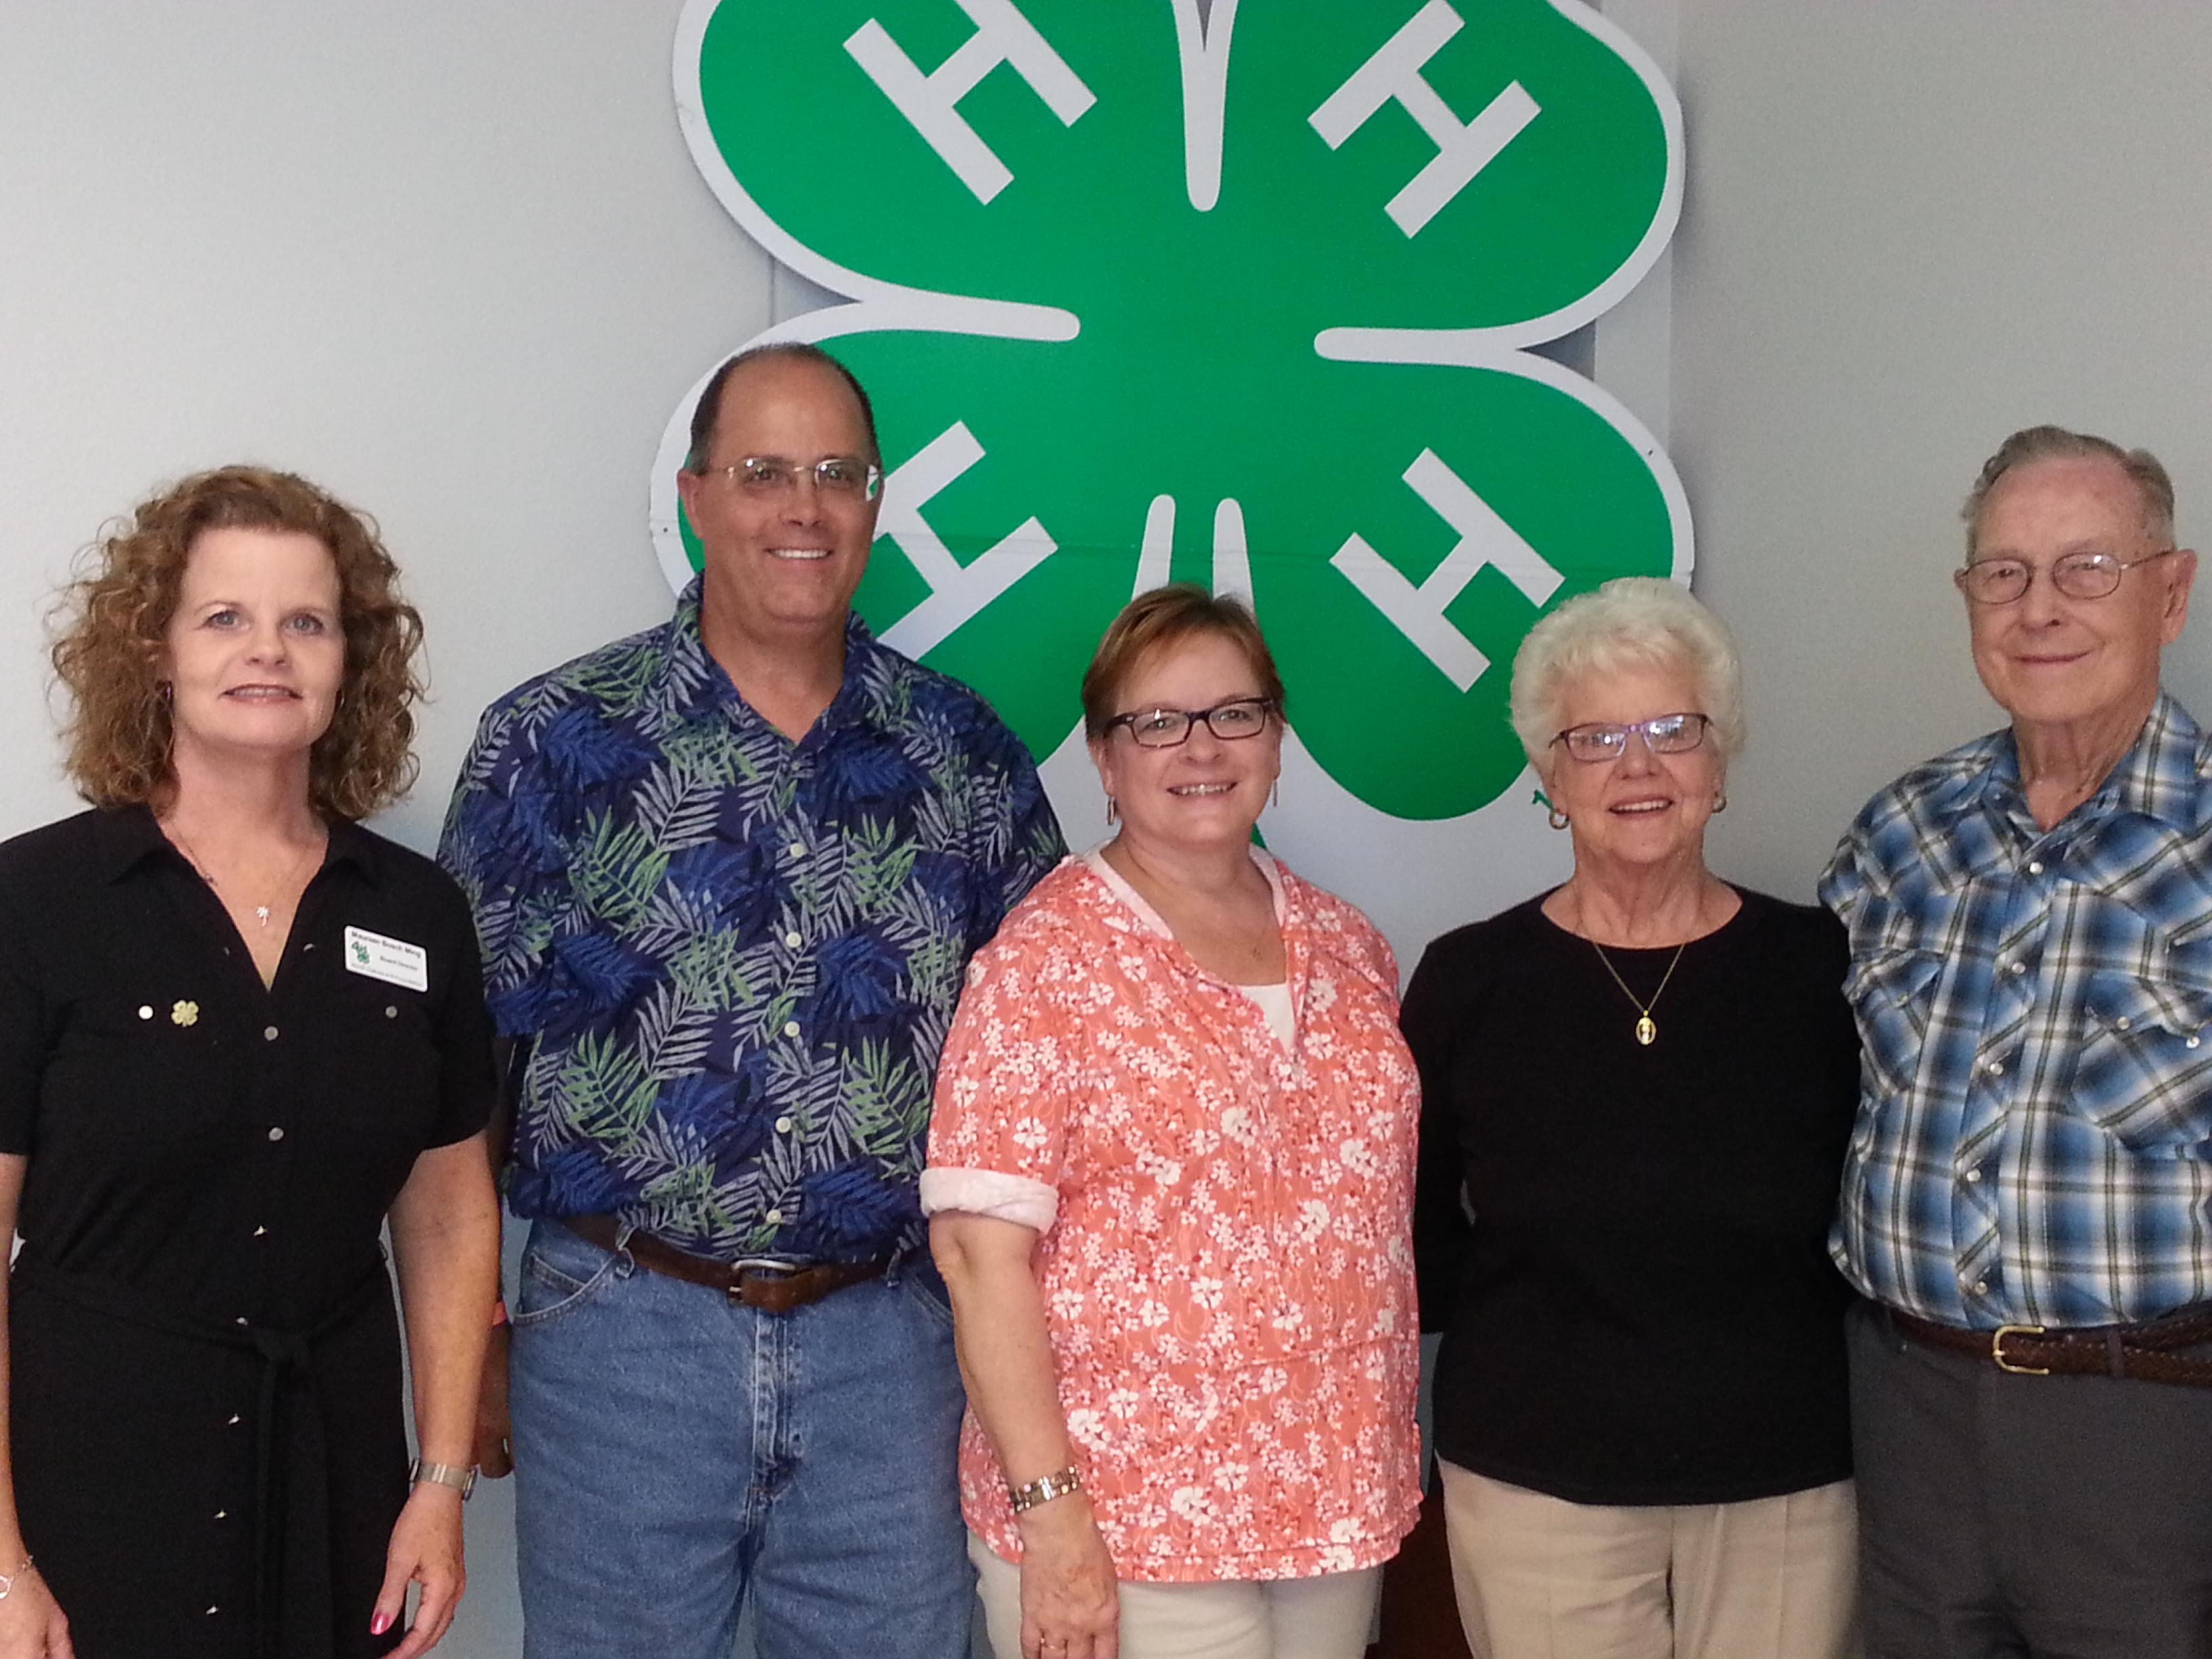 Morris Nelson of Washburn (far right) is inducted into the North Dakota 4-H Hall of Fame in Minot. He is accompanied by (from left) North Dakota 4-H Foundation President Maureen Ming, Bob and Kim (daughter) Erlandson of Bismarck and Barb Goehring of Jamestown.